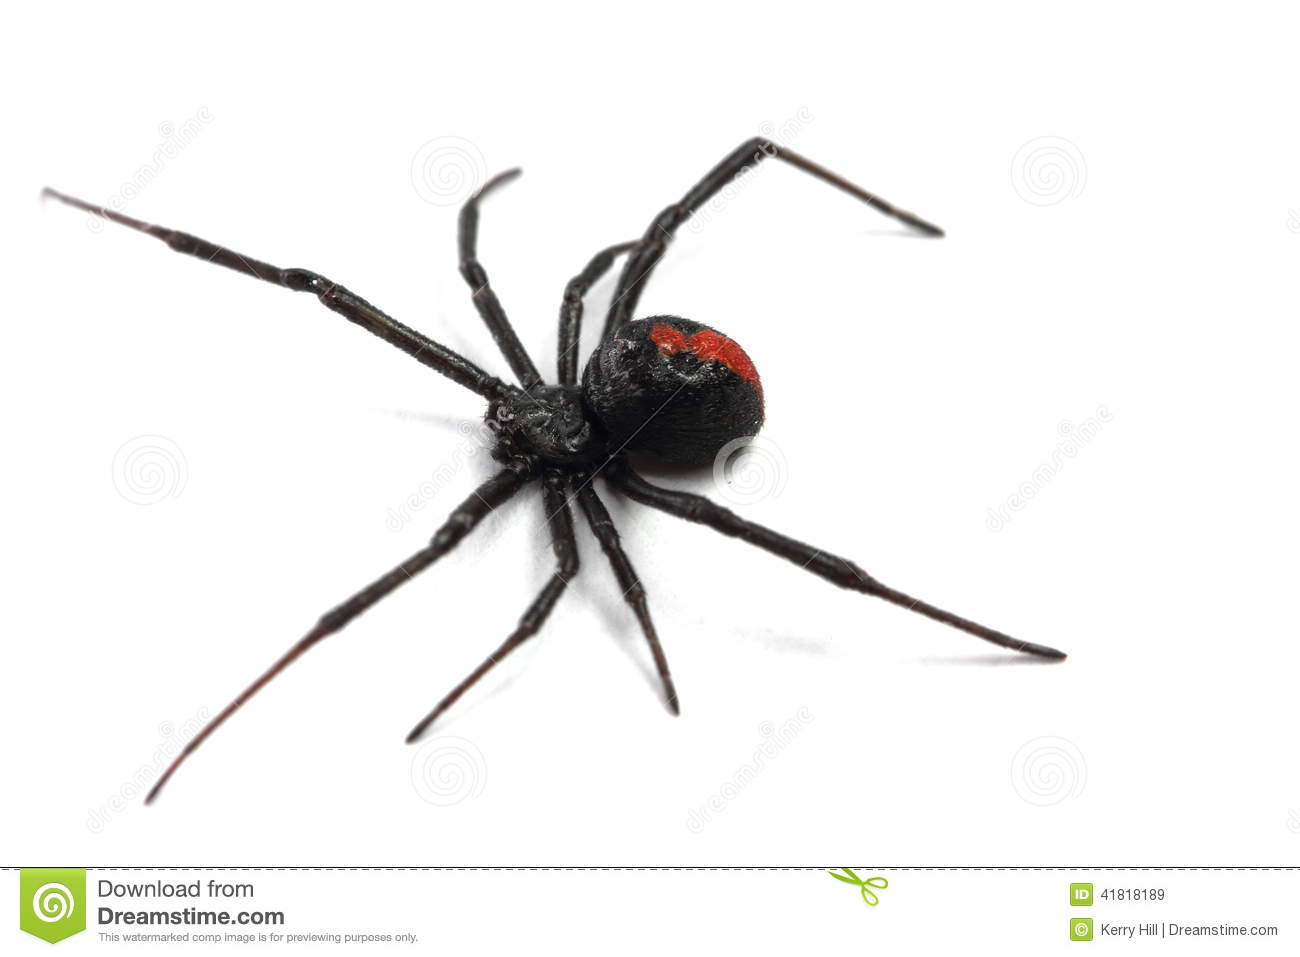 Redback Spider clipart #12, Download drawings